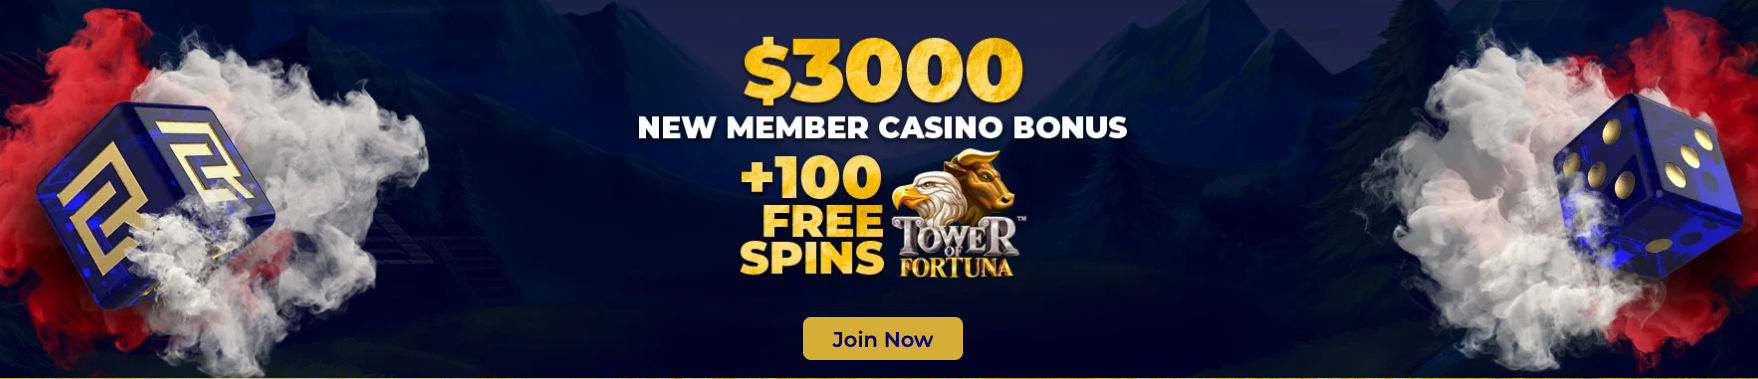 Club riches bonus and promotion offers